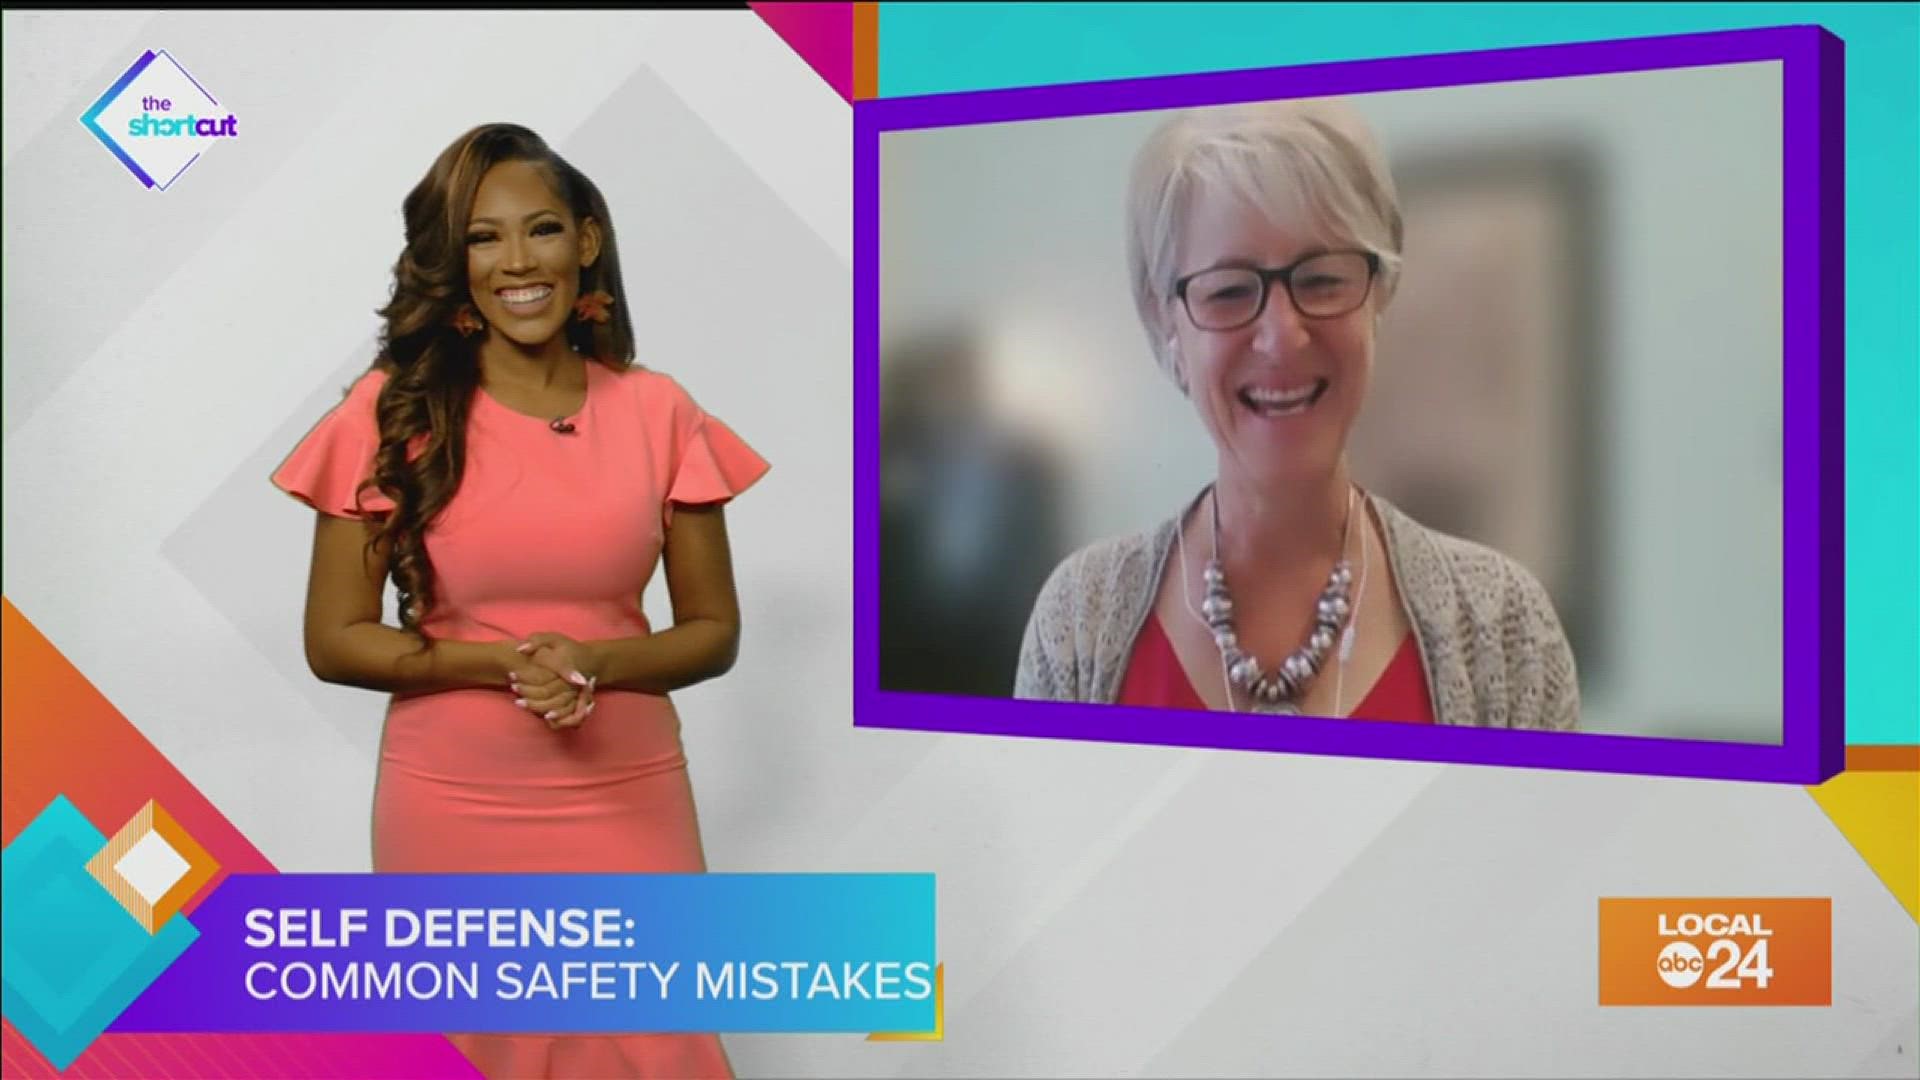 Don't become another statistic! Whether you're a man or woman, keep yourself and others safe with these self-defense tips from Lorna Selig of Safe 4 Life!